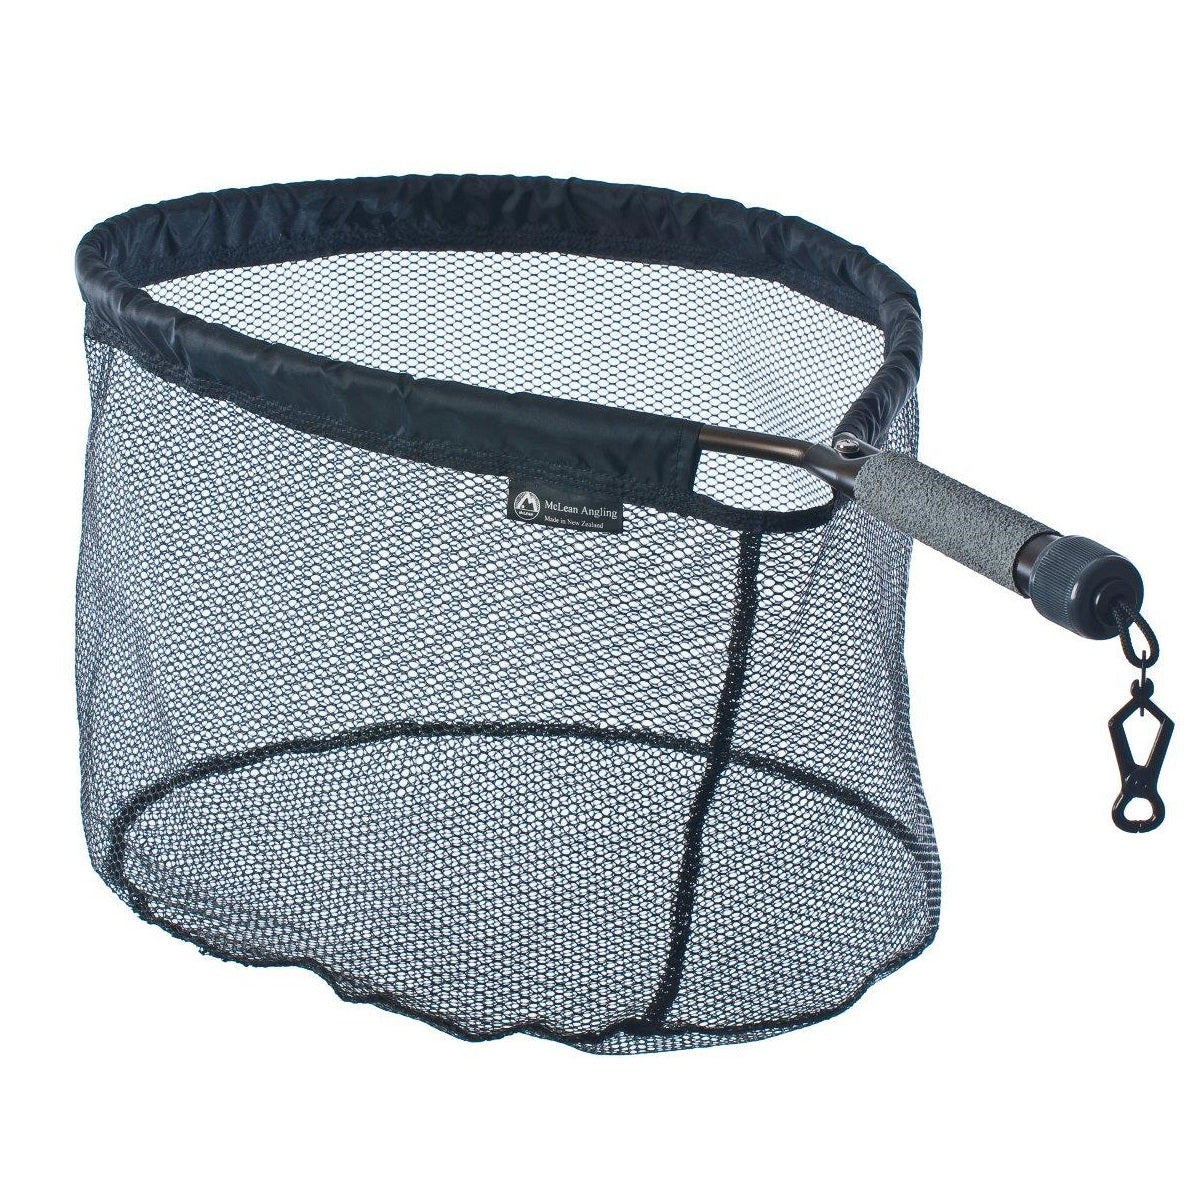 McLean Angling Rubber Mesh Bronze Short Handle Net - MEDIUM - Mansfield Hunting & Fishing - Products to prepare for Corona Virus